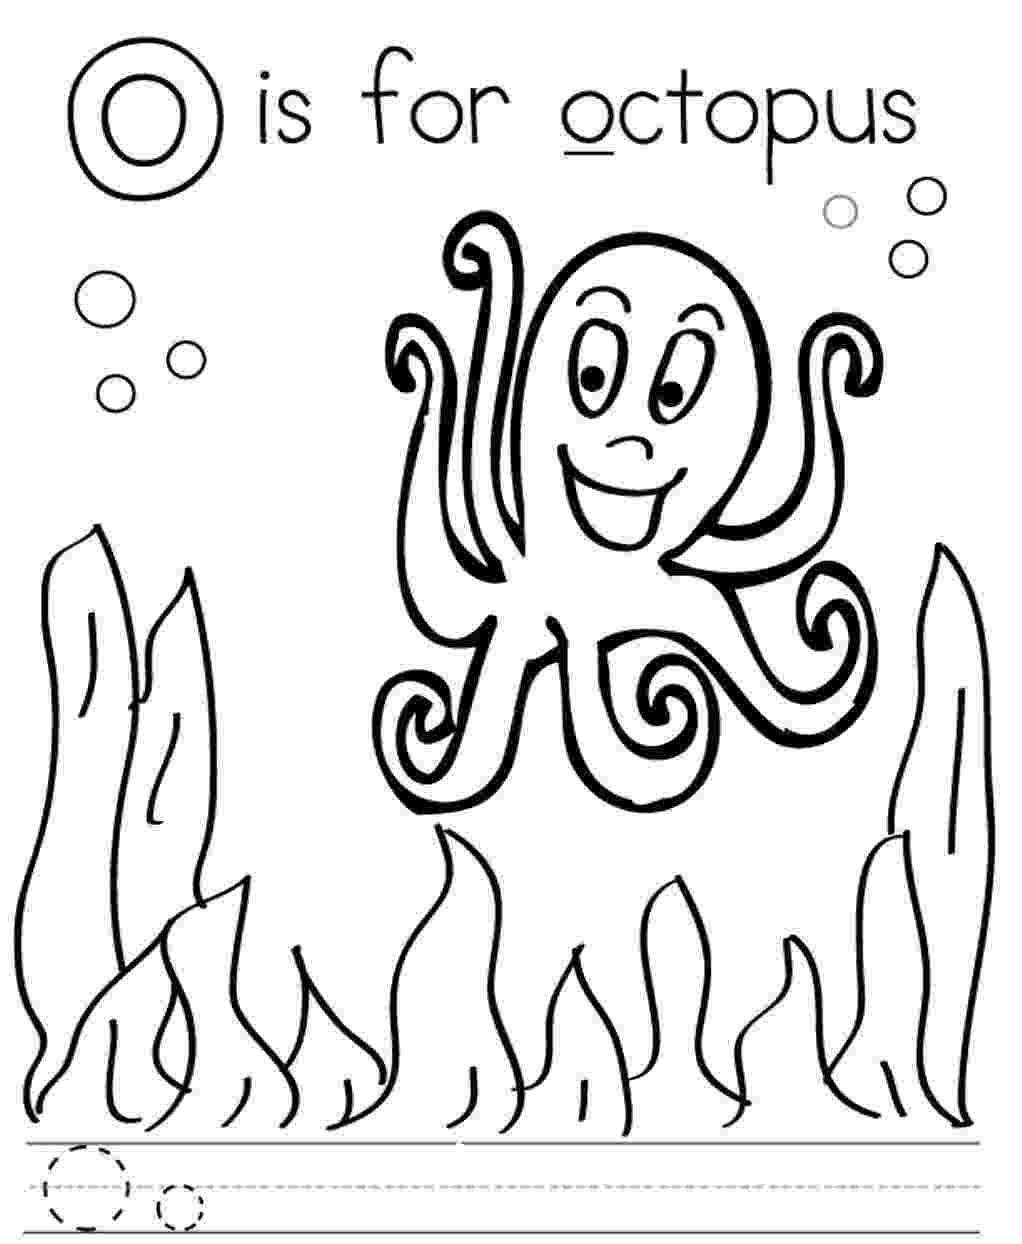 octopus coloring page preschool preschool octopus coloring pages sea life art projects page octopus coloring preschool 